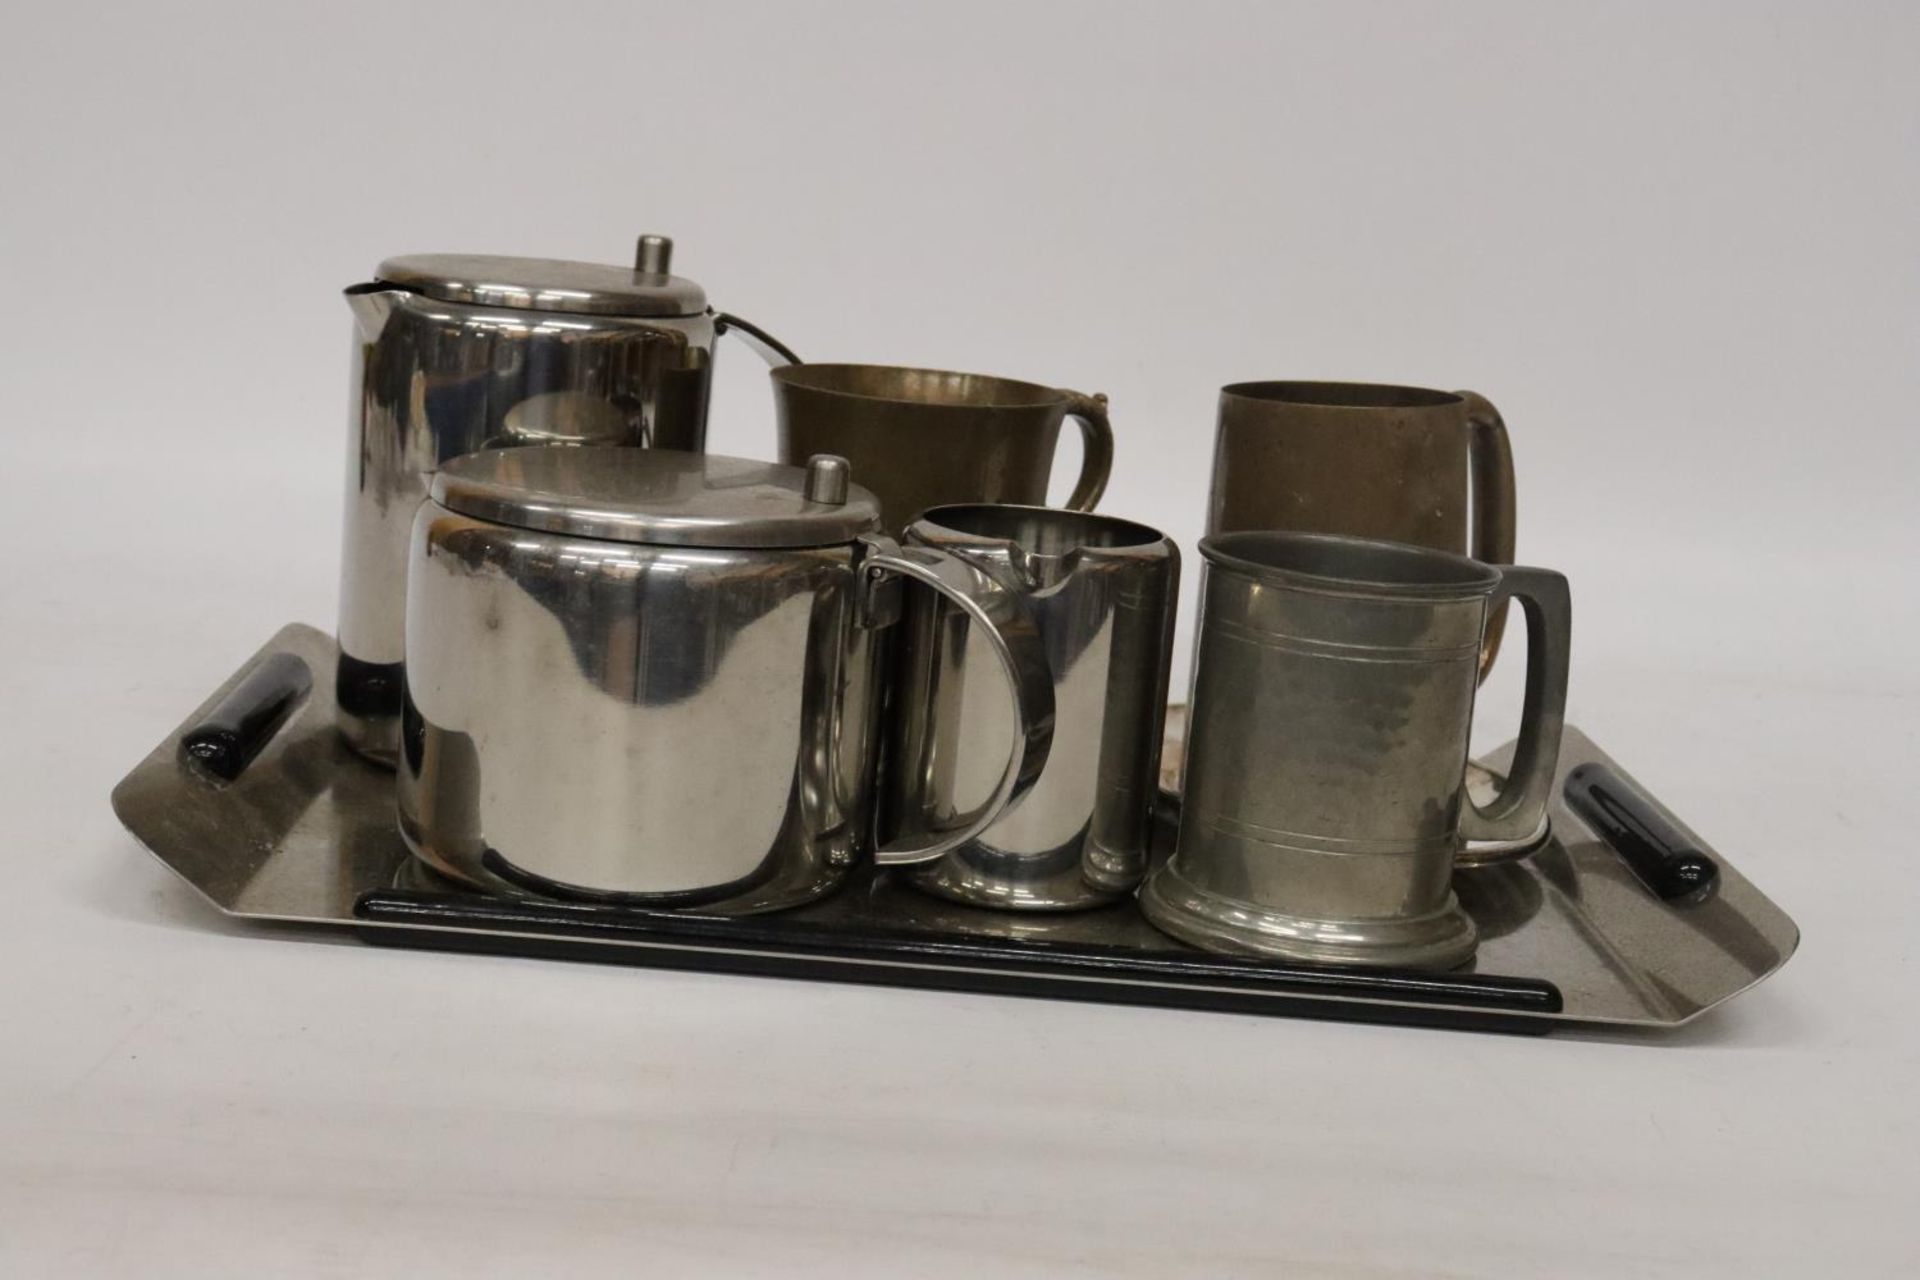 TWO BRASS TANKARDS, A PEWTER TANKARD, STAINLESS STEEL TEA POT, HOT WATER JUG AND CREAM JUG ON A TRAY